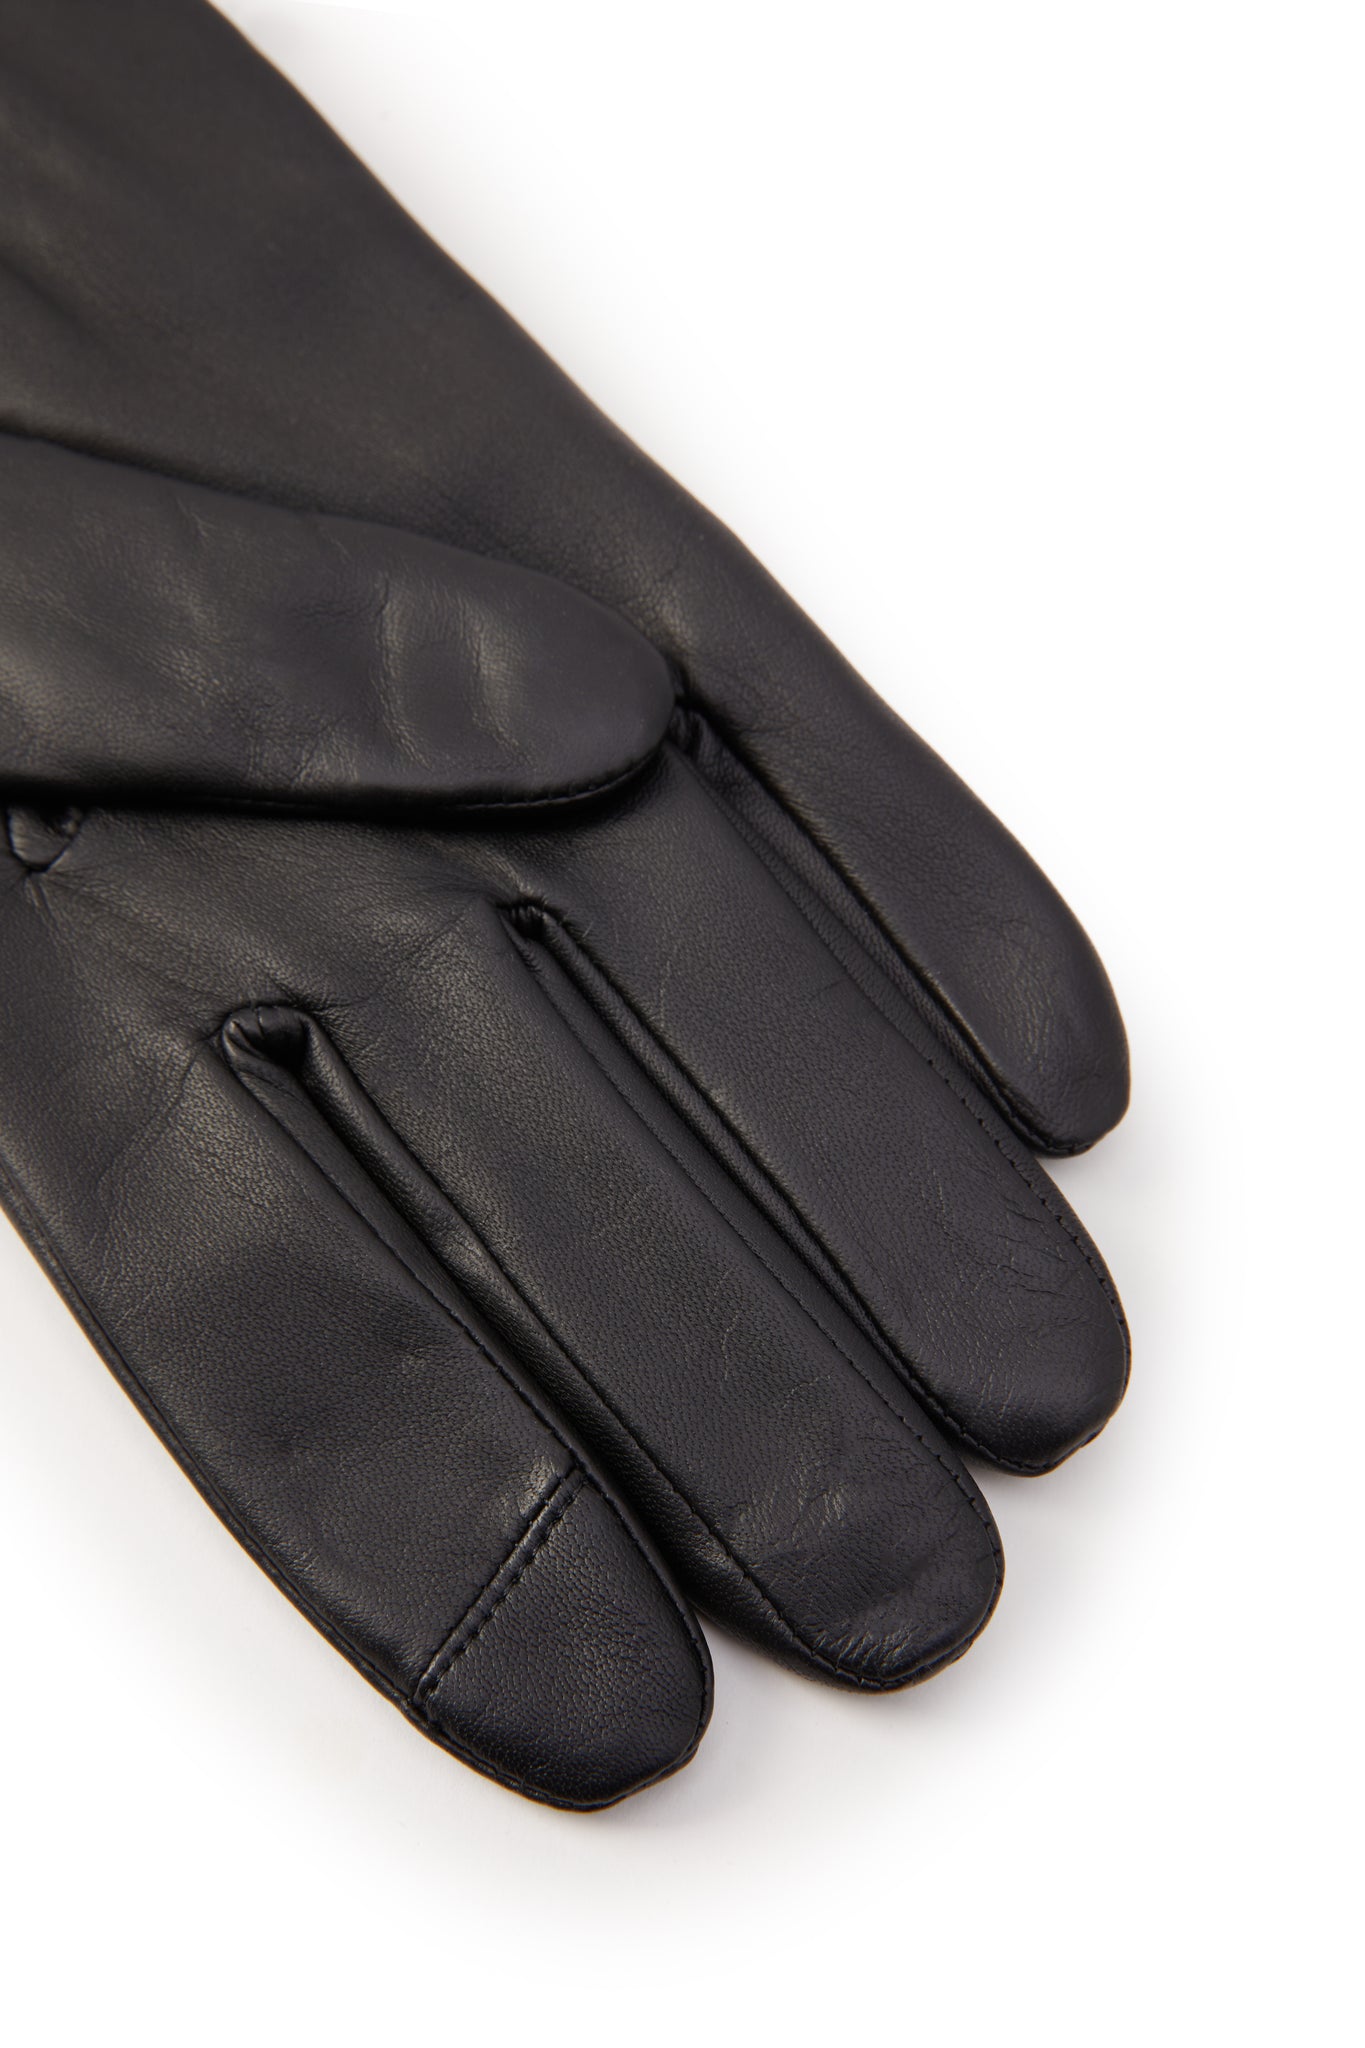 Contrast Leather Gloves (Black Tan)